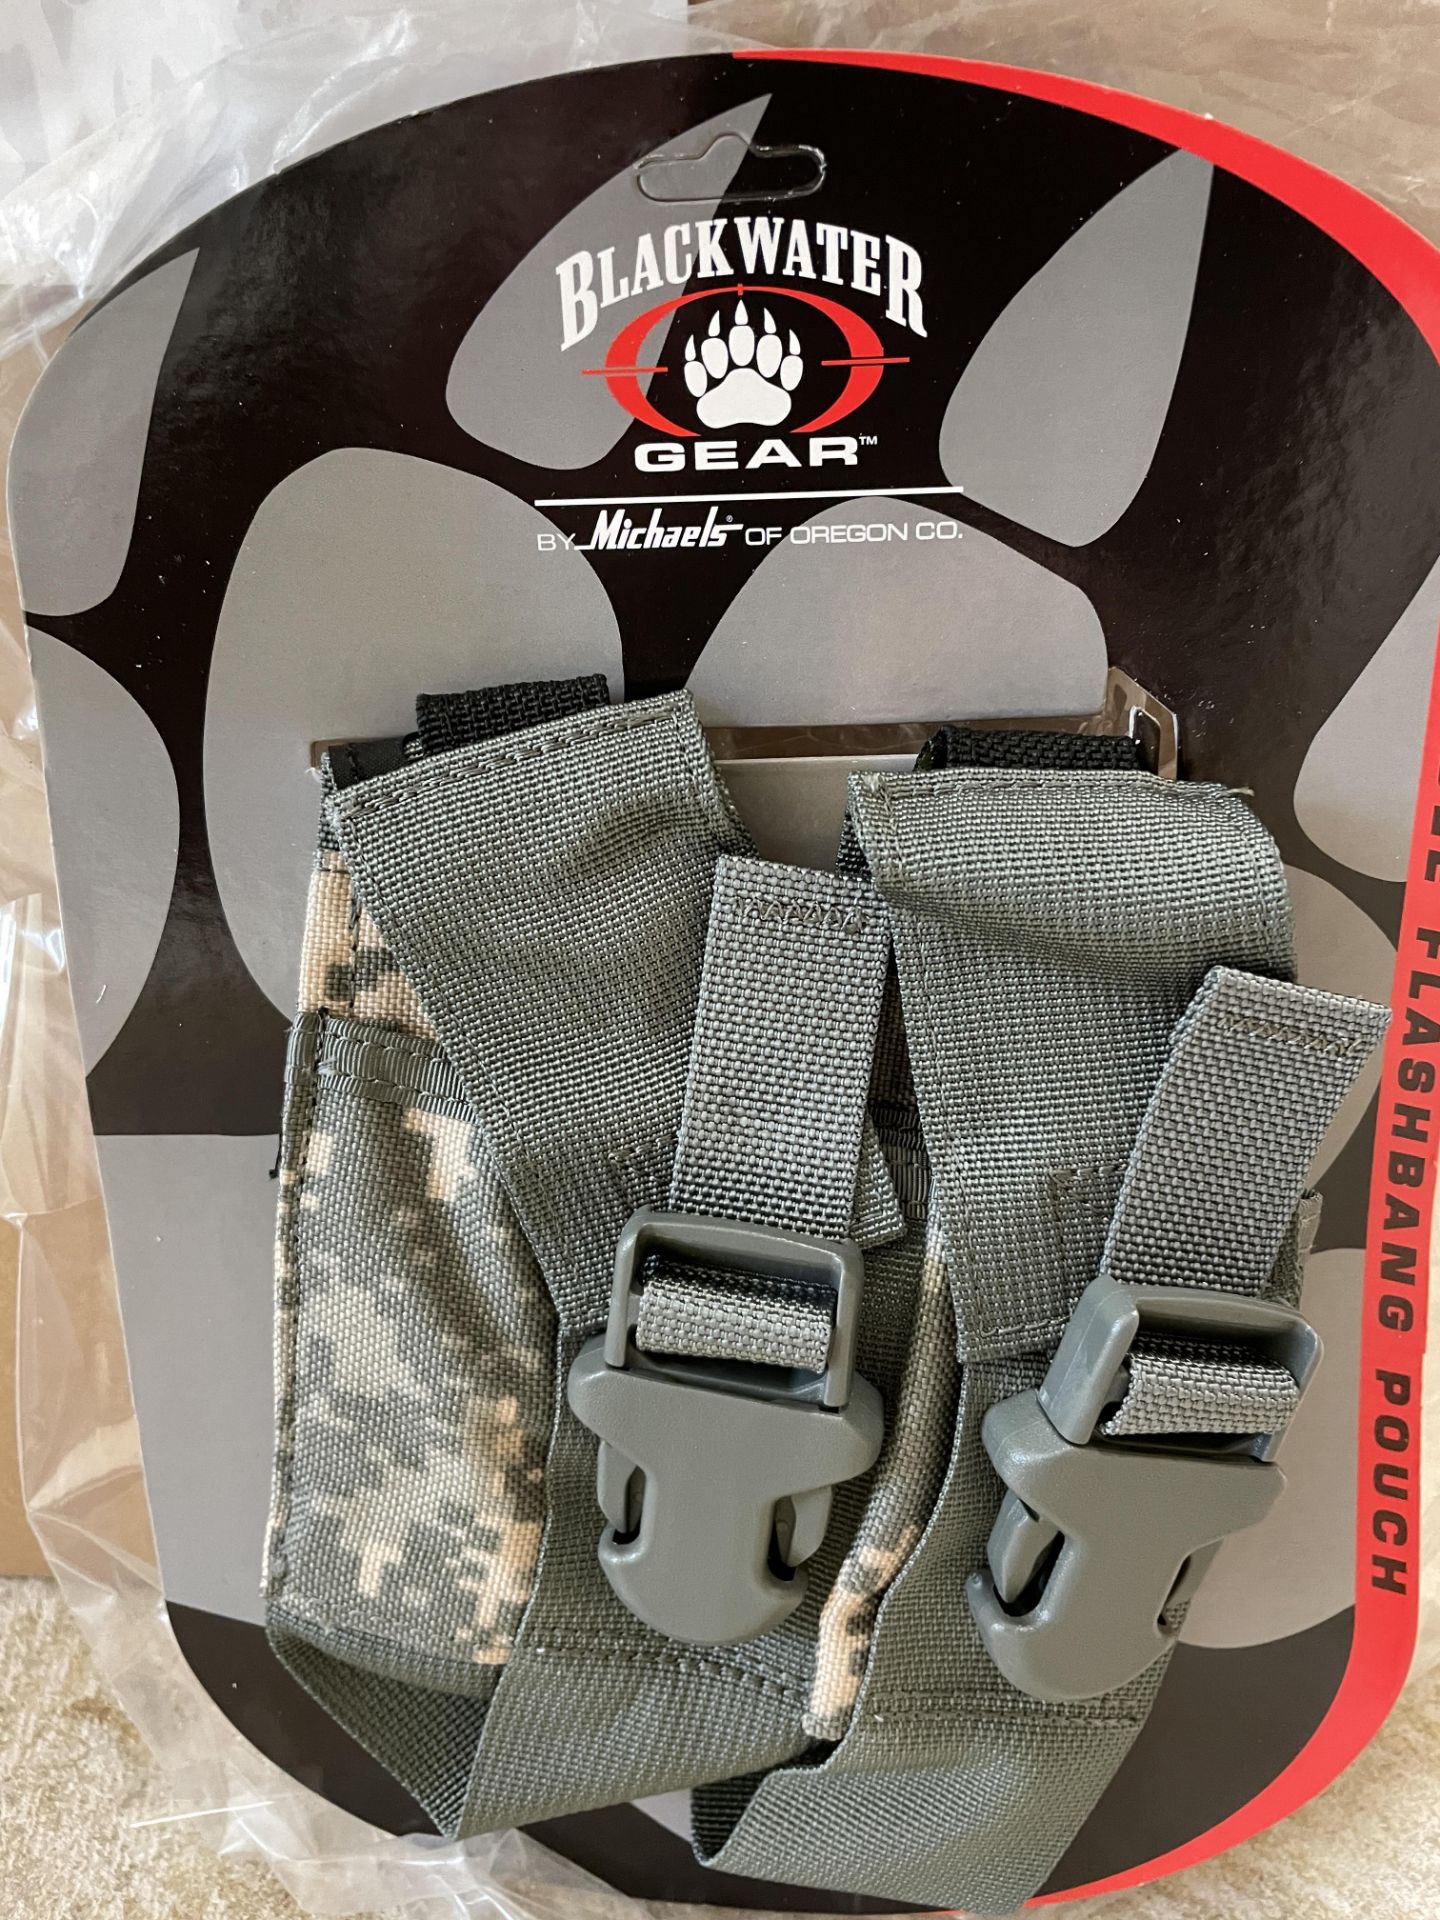 16 Blackwater Gear Double Flashbang Pouches in Digital Army Camo, In Packaging, Tactical Gear - Image 2 of 3